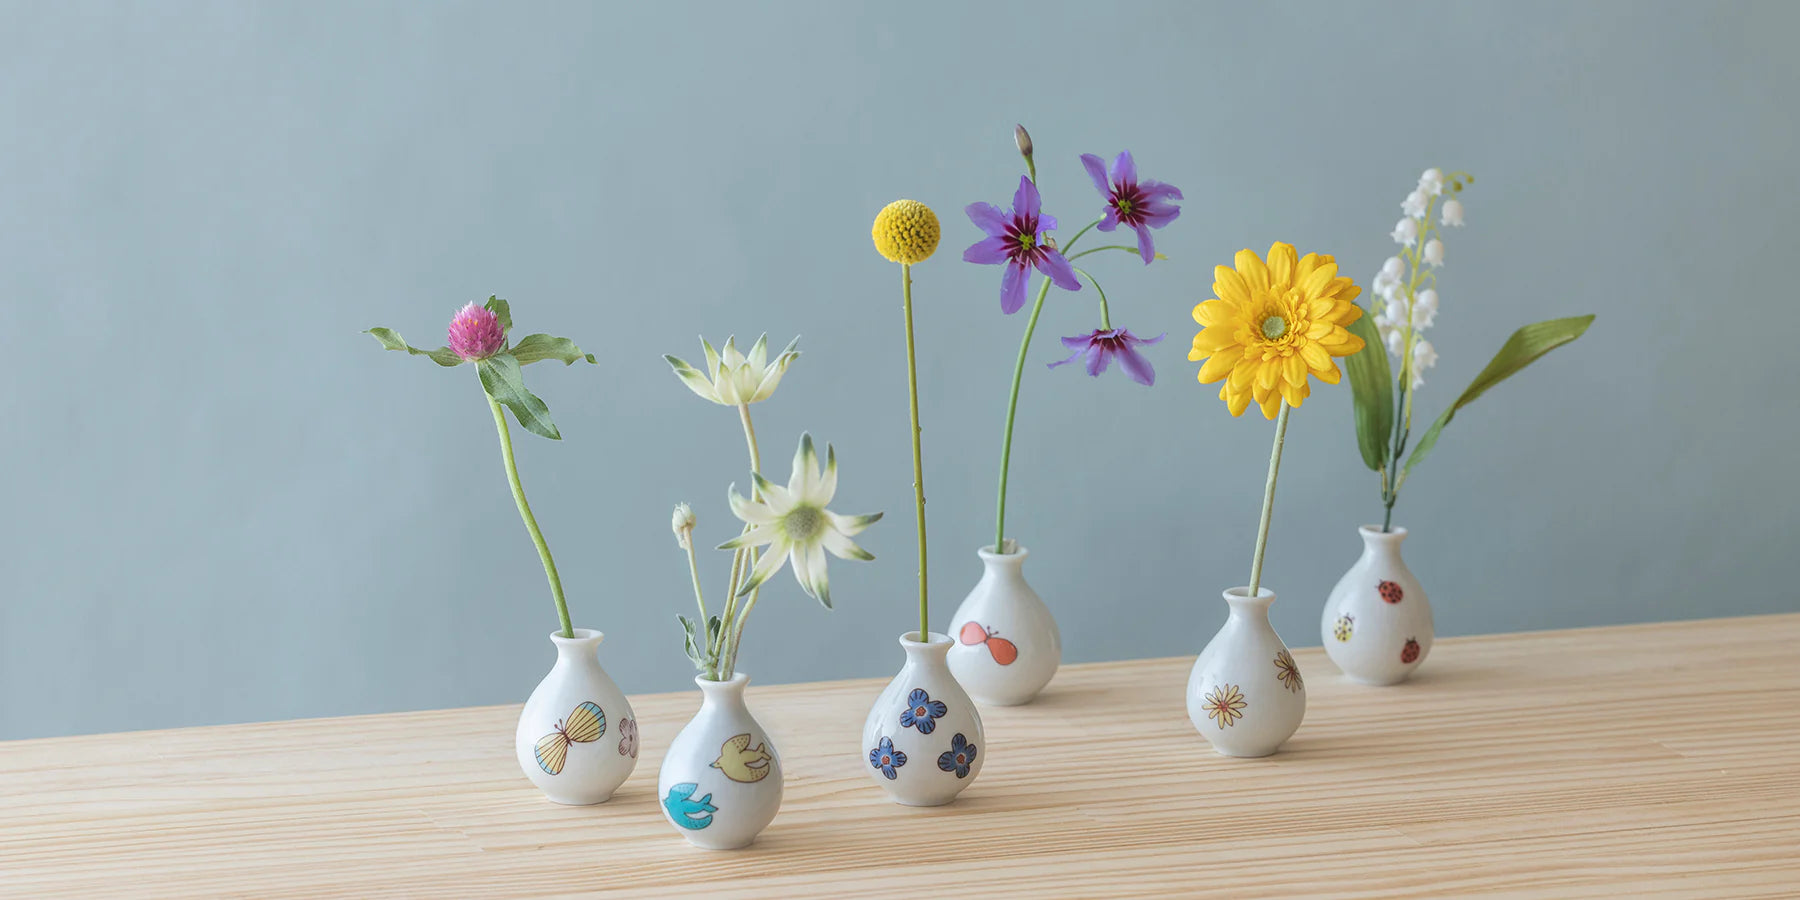 Discover our great selection of Vases at Globalkitchen Japan.